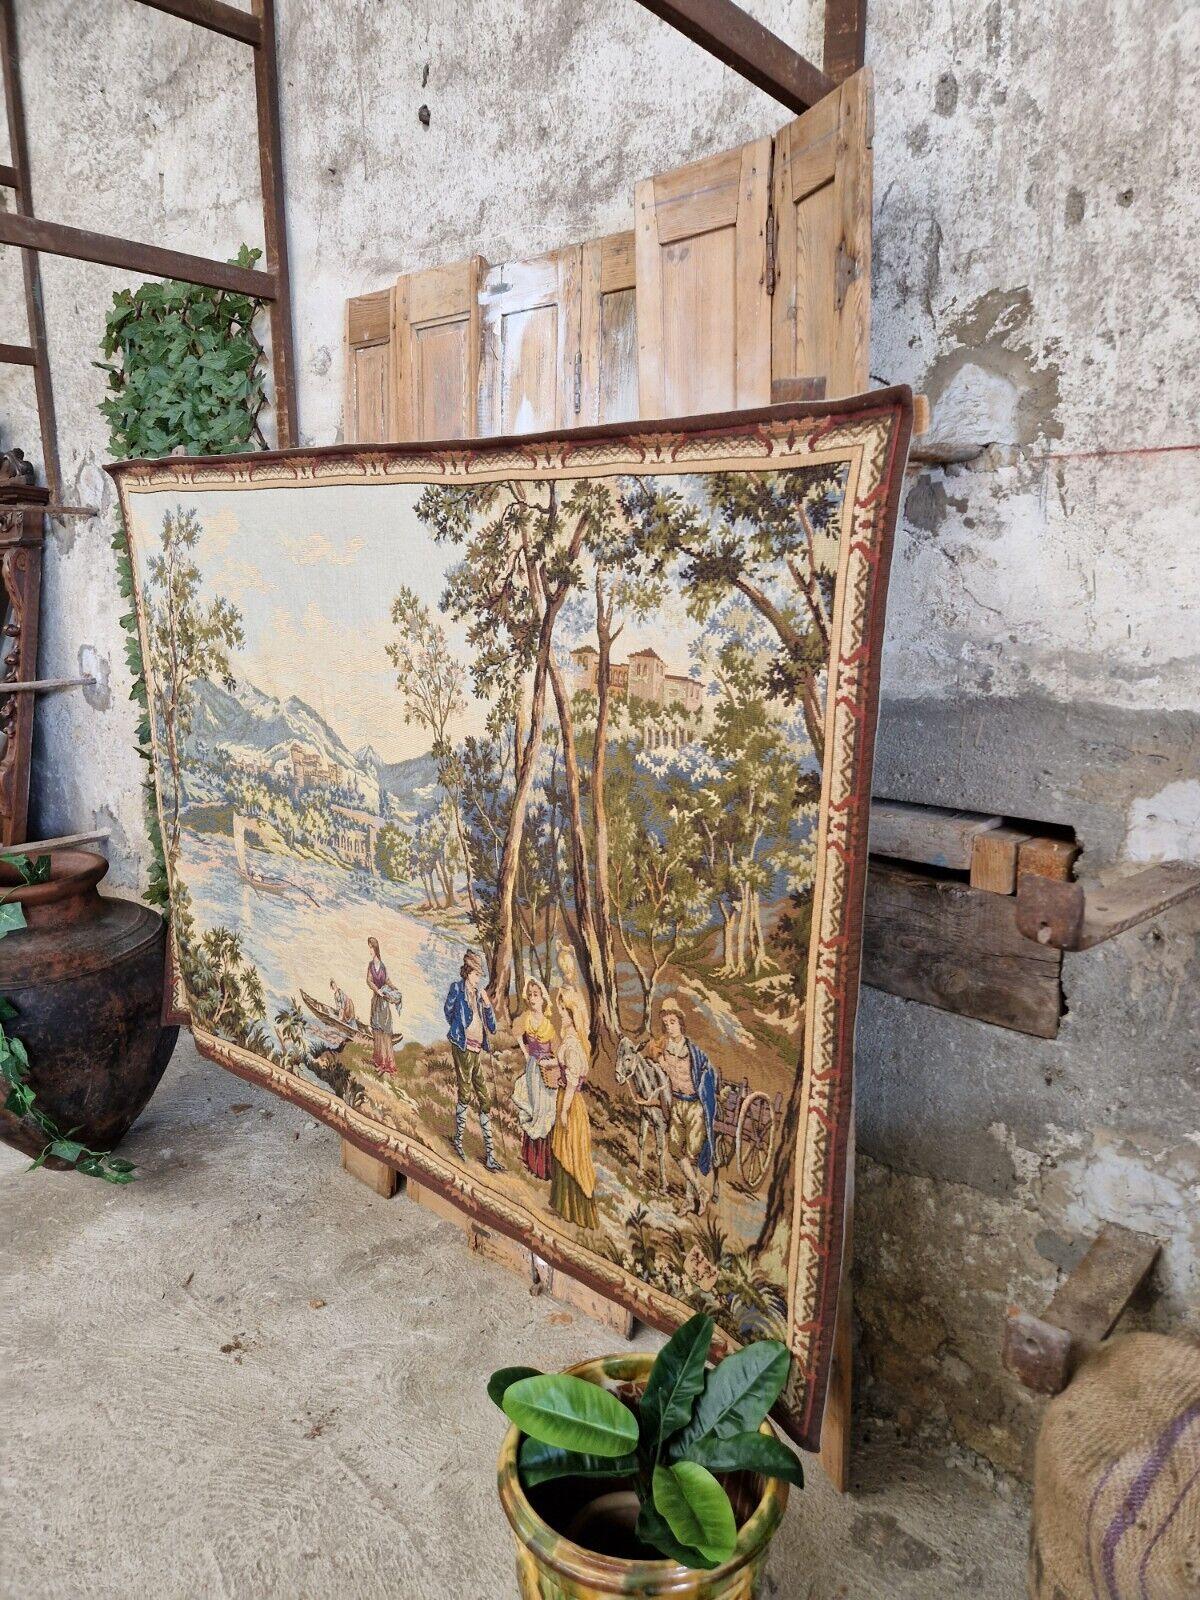 Antique French Tapestry Large AUBUSSON 126 x 181 cm

Fabulous Aubusson Tapestry from the Cruse Area (Department 24)

Showing a Gallant River Scene

Large 126 H x 181 W

Stamped D Halliun

Dimensions
181 x 126 cm

All of our goods are